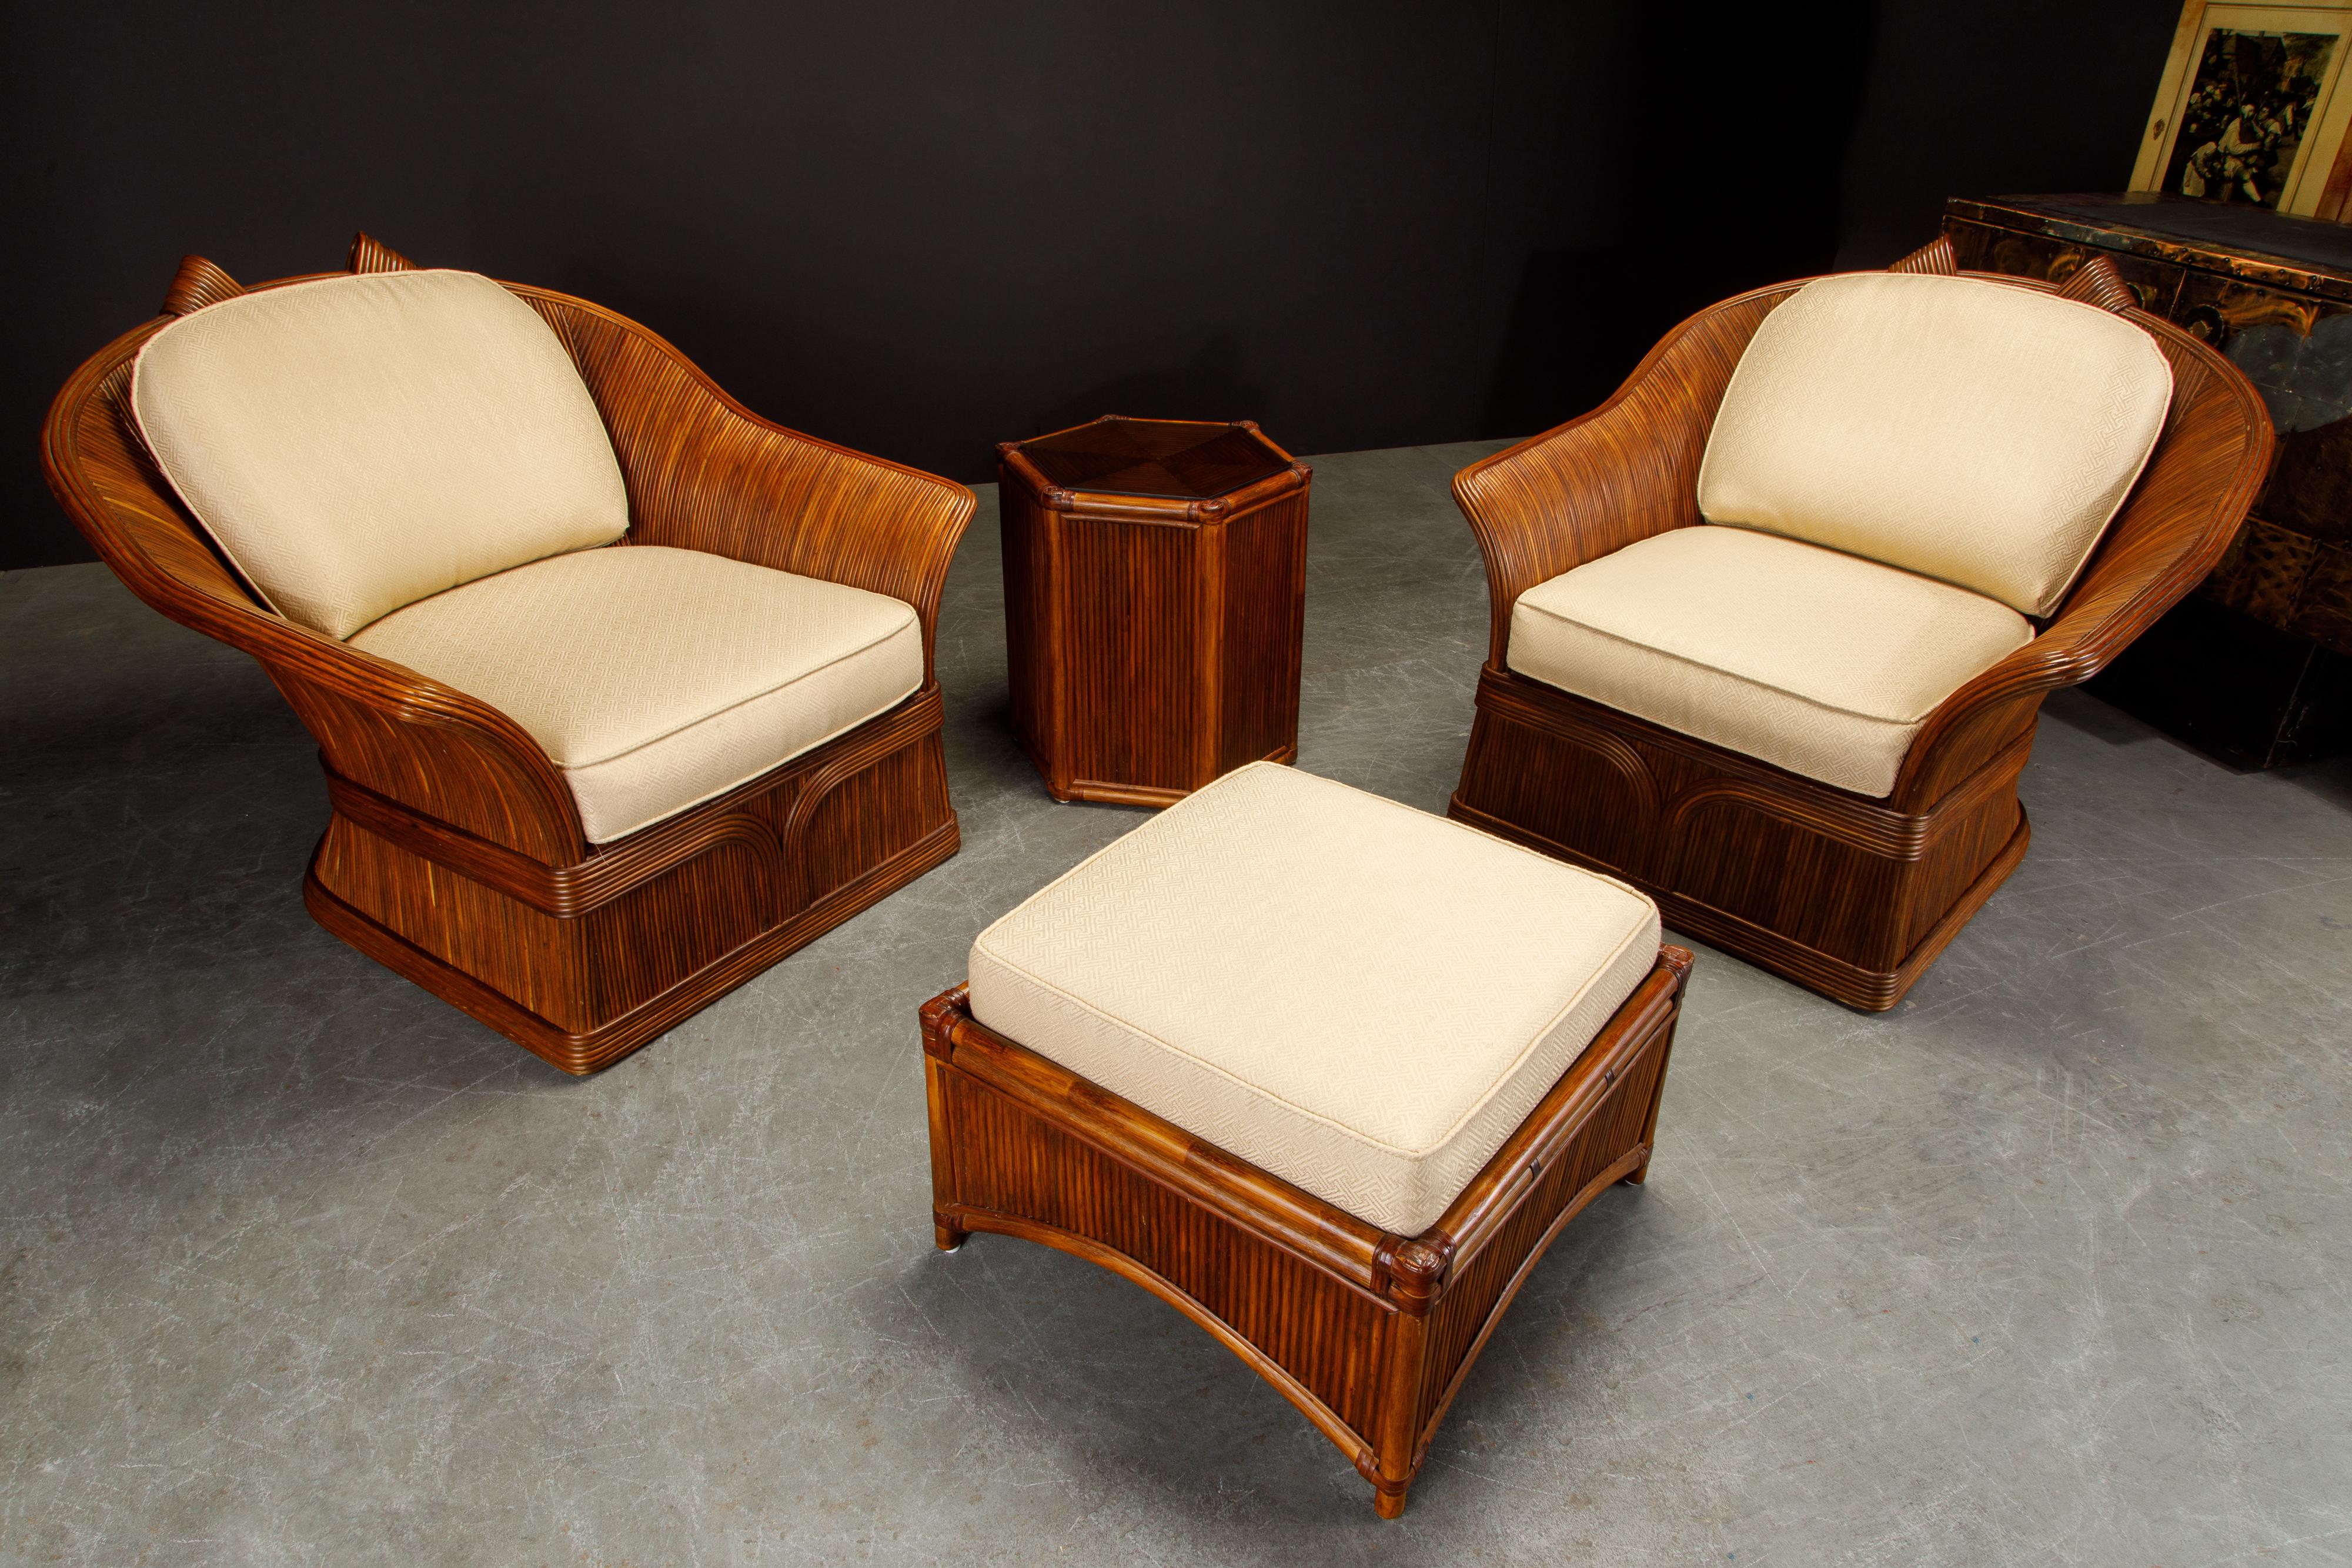 Late 20th Century Pencil Reed Rattan Lounge Chair Set Attributed to Betty Cobonpue, circa 1980s